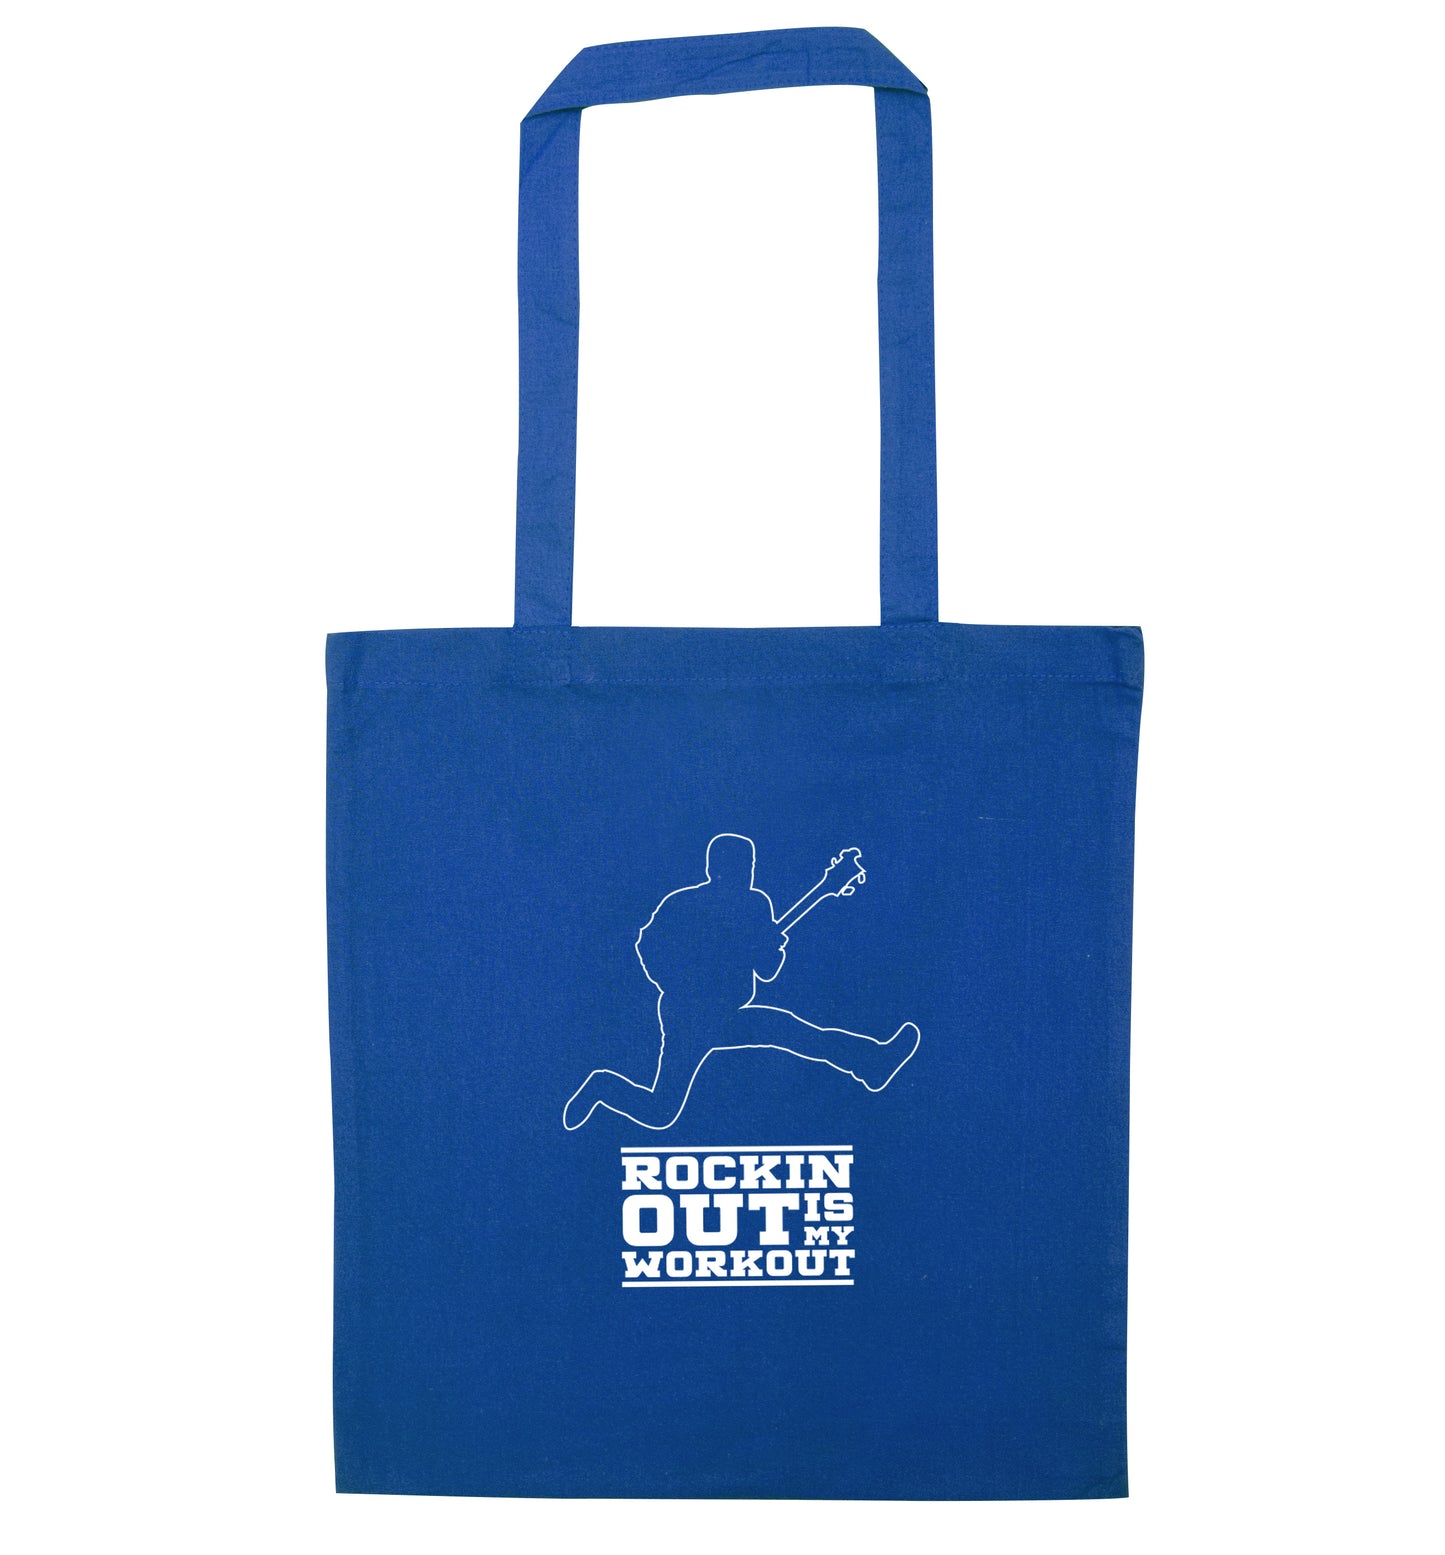 Rockin out is my workout 2 blue tote bag